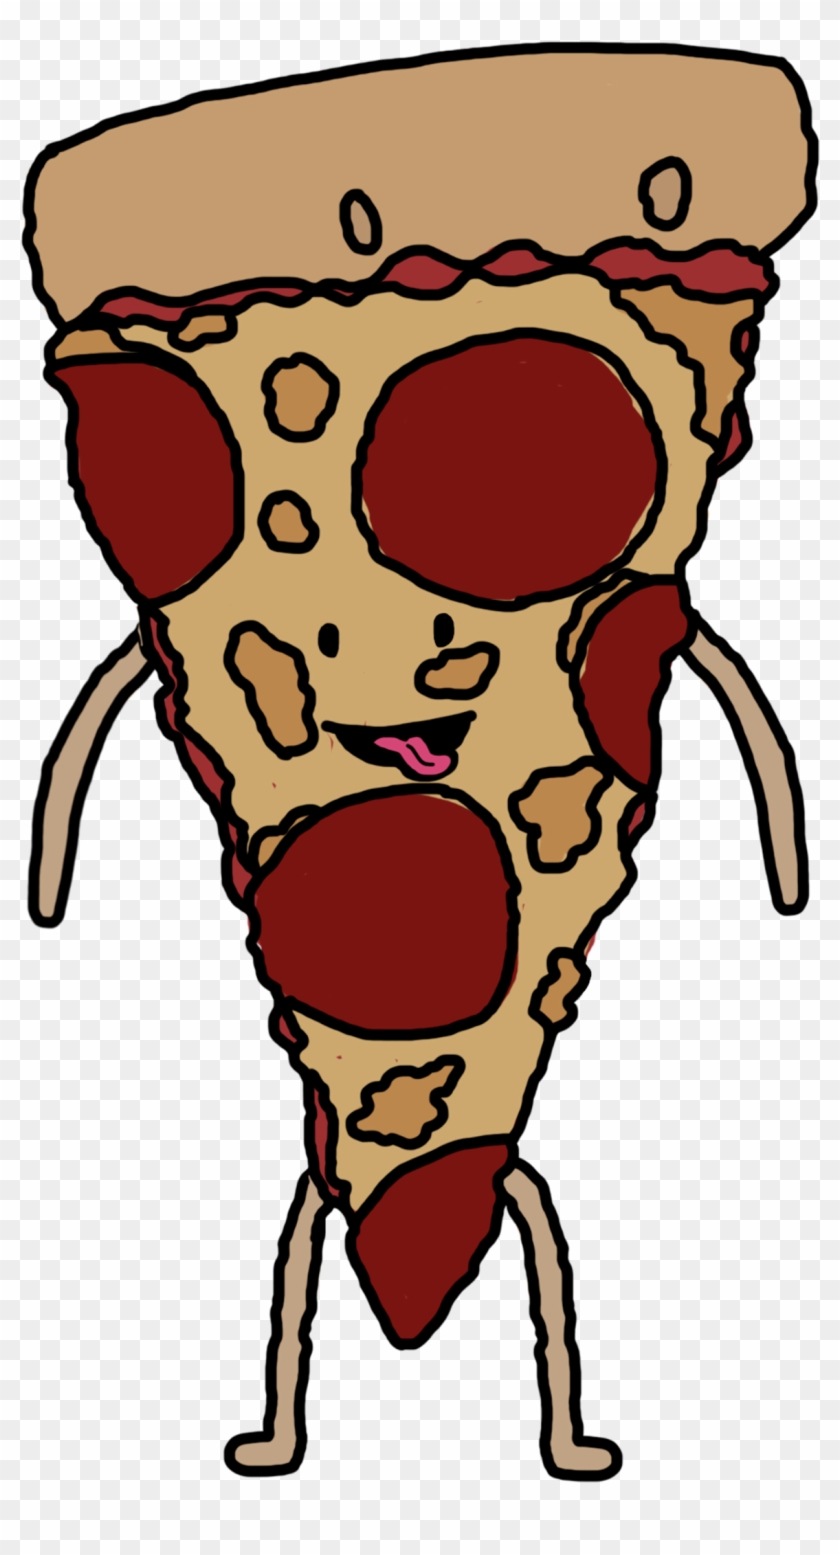 After I Brought The Designs Into Illustrator I Used - Pizza #263412